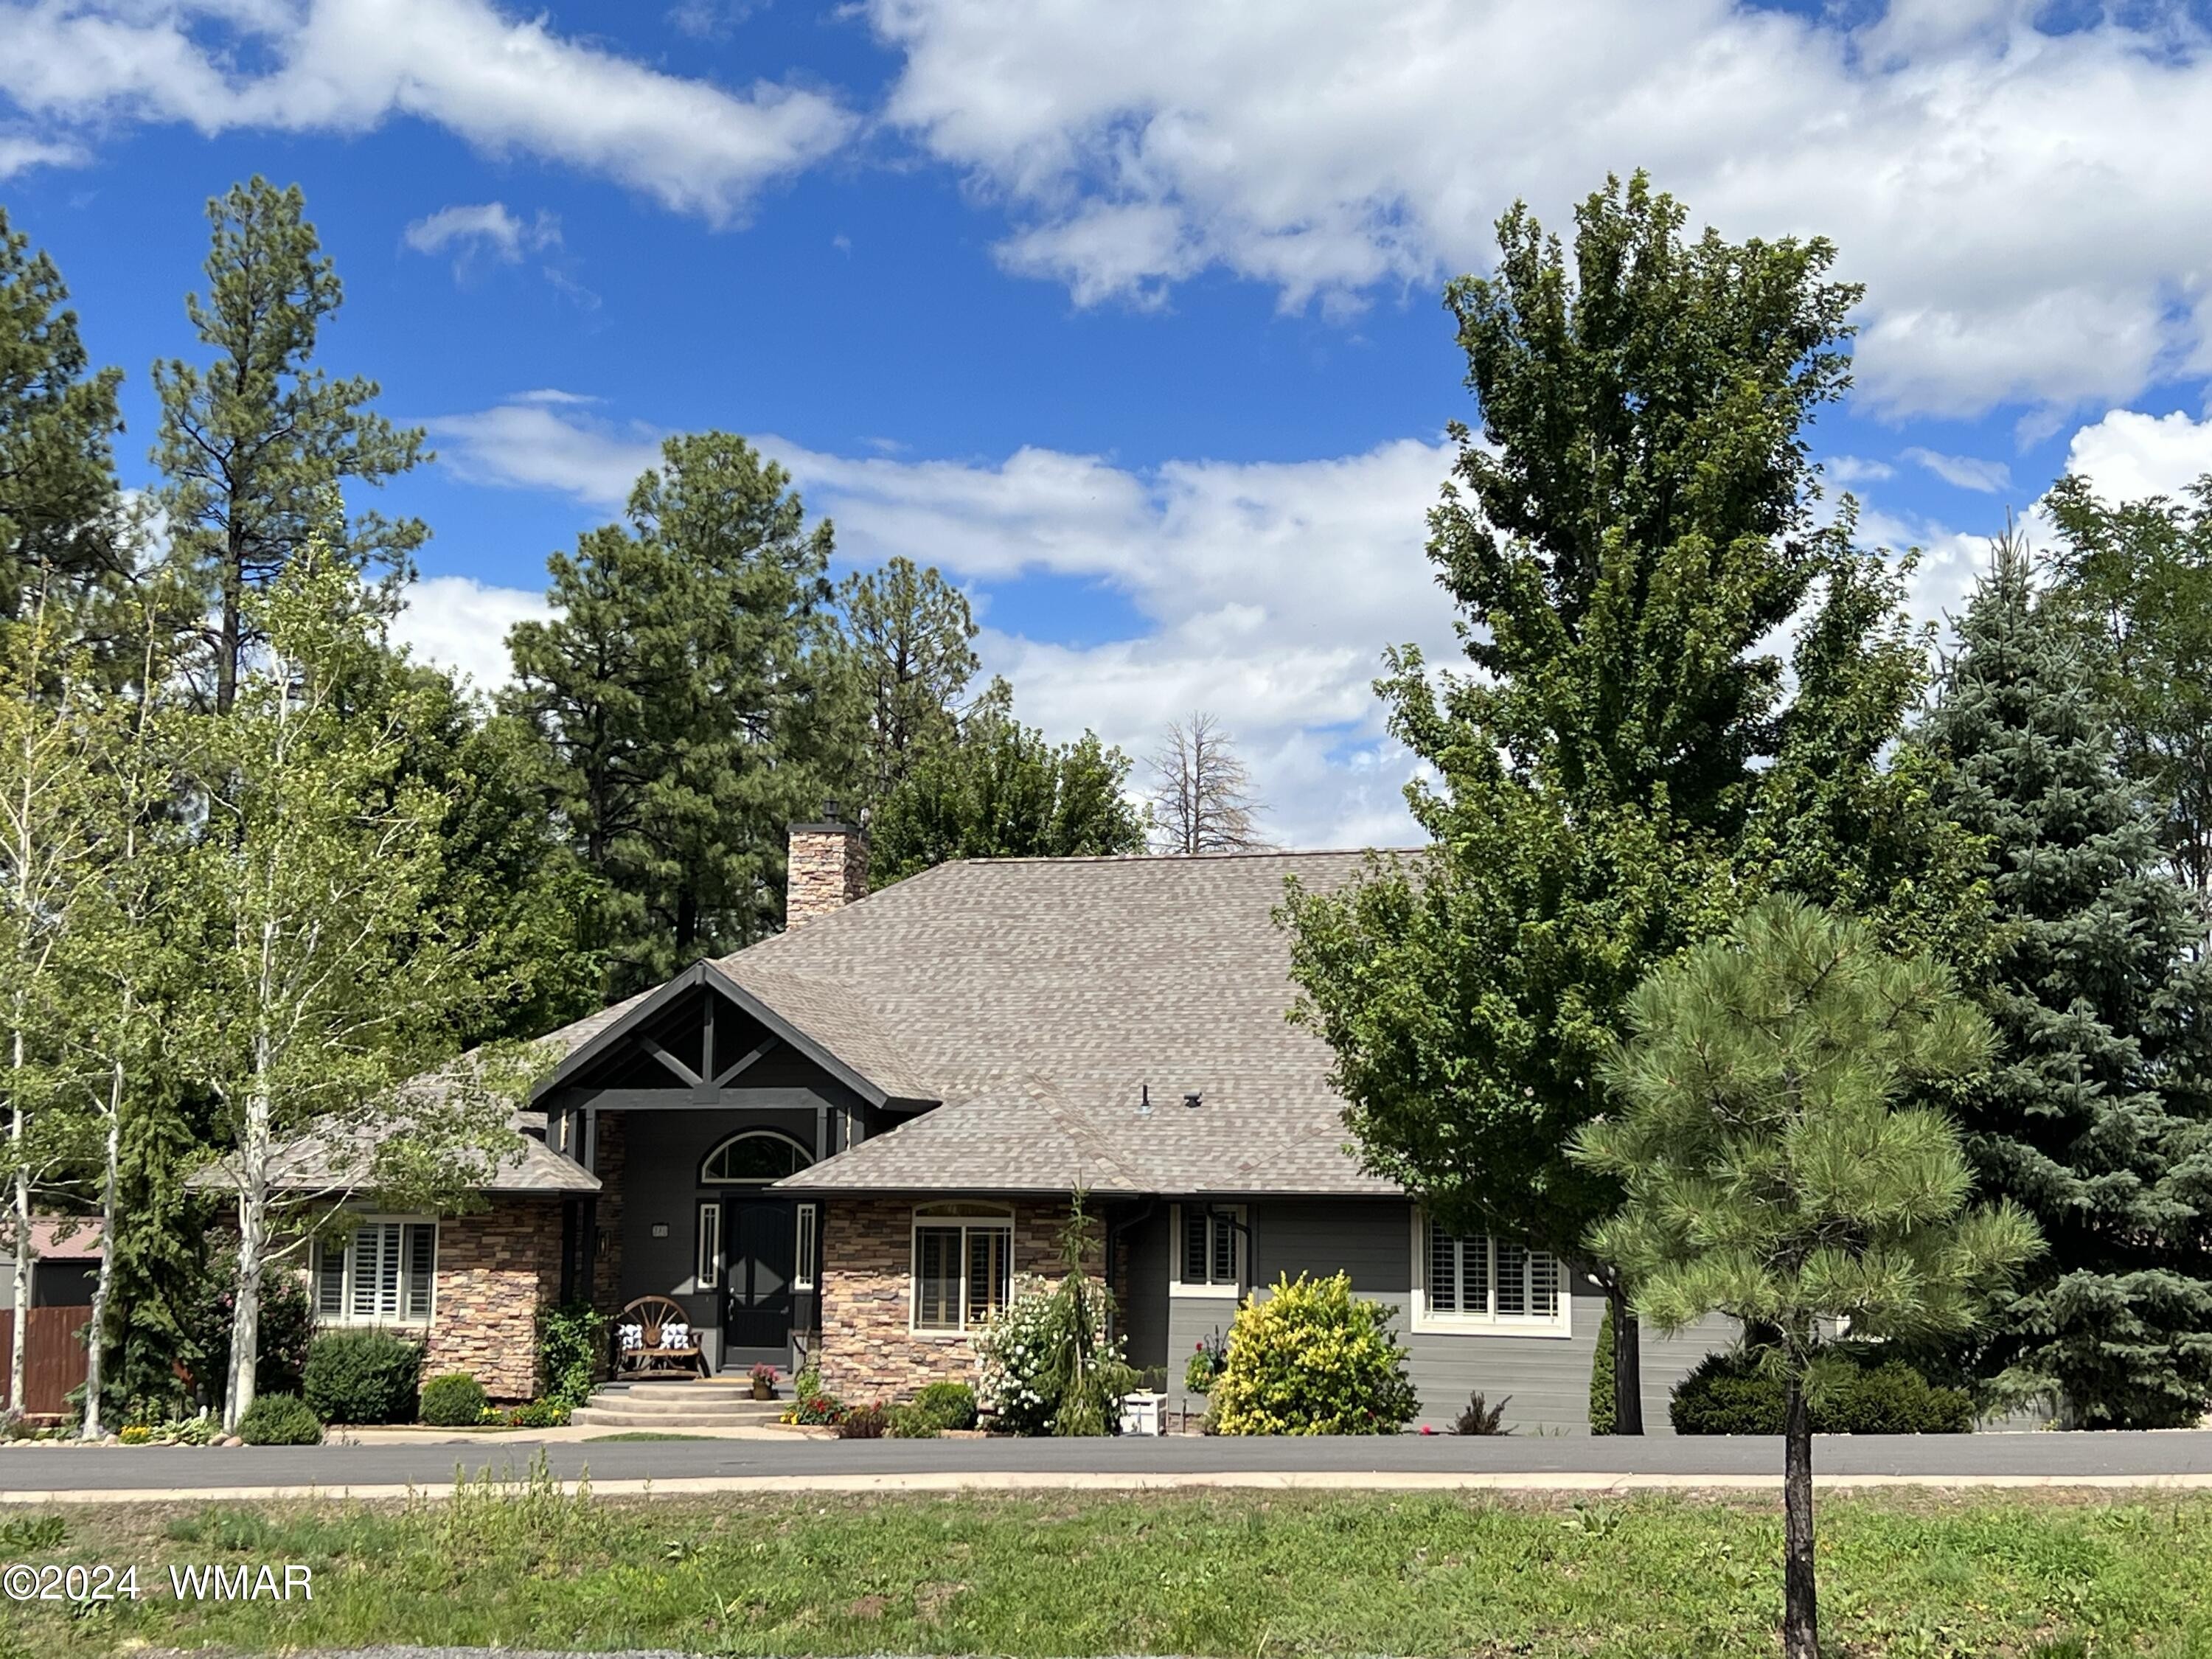 Pinetop, Arizona, 85935, United States, 4 Bedrooms Bedrooms, ,3.5 BathroomsBathrooms,Residential,For Sale,1510370